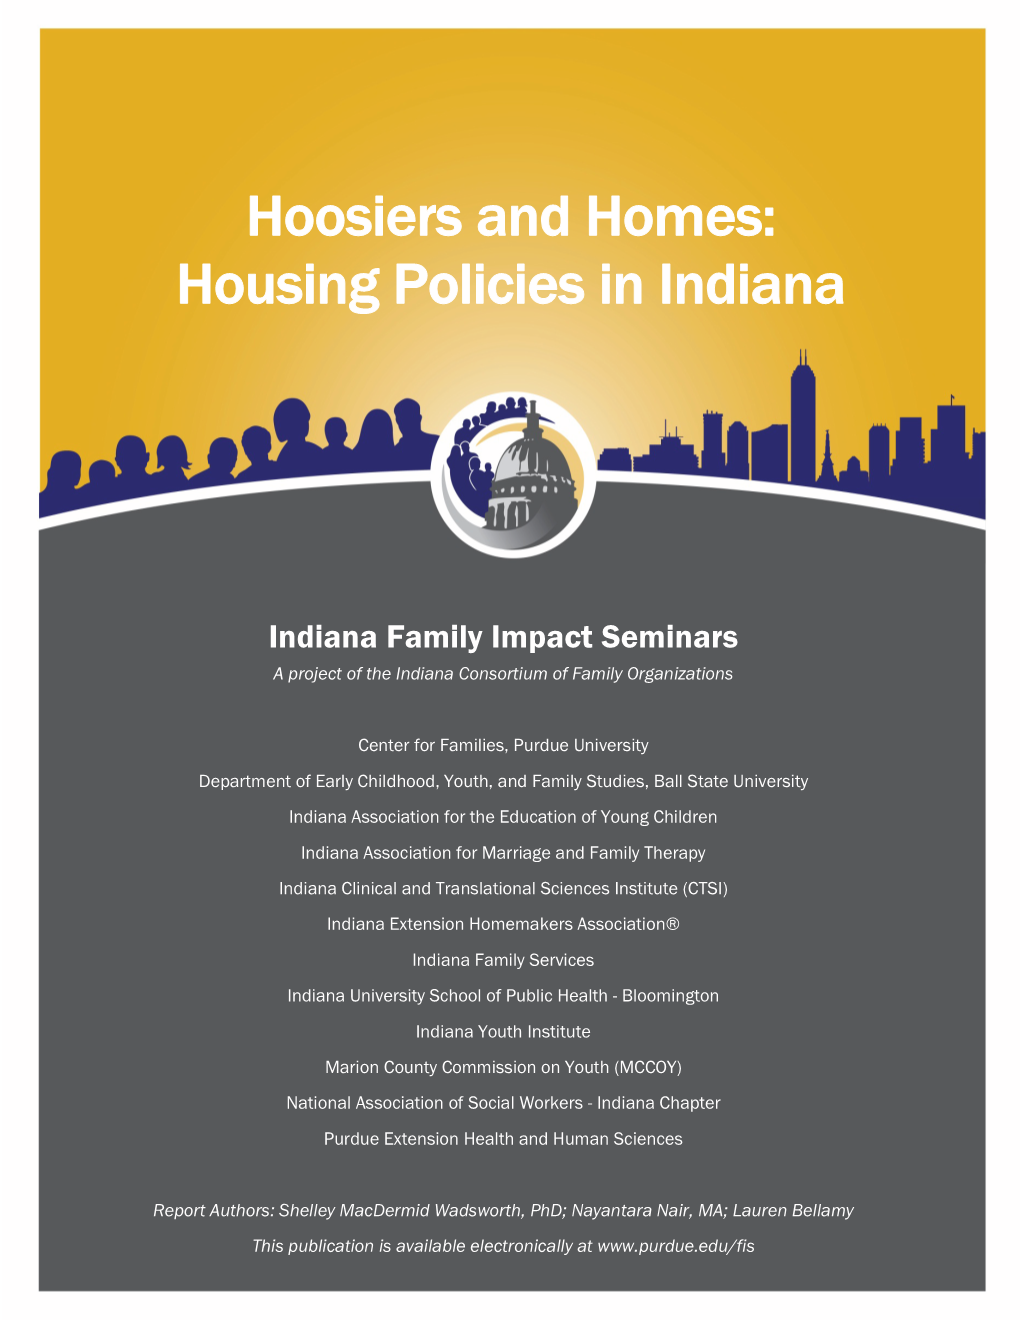 2019 Hoosiers and Homes: Housing Policies in Indiana